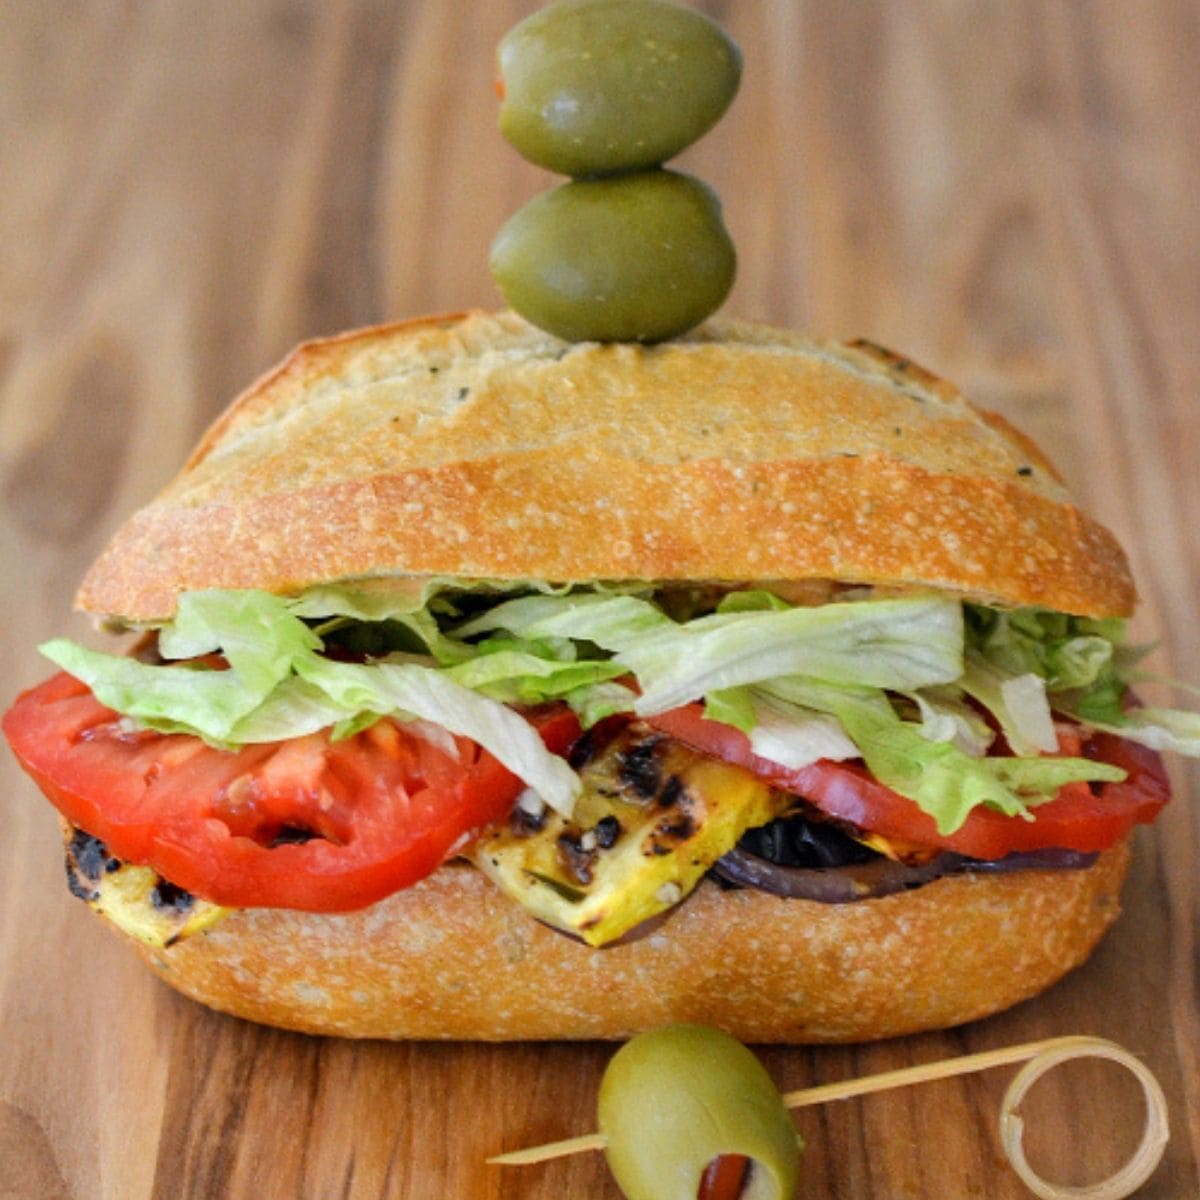 Grilled Vegetable Sandwich with olives on a cutting board.